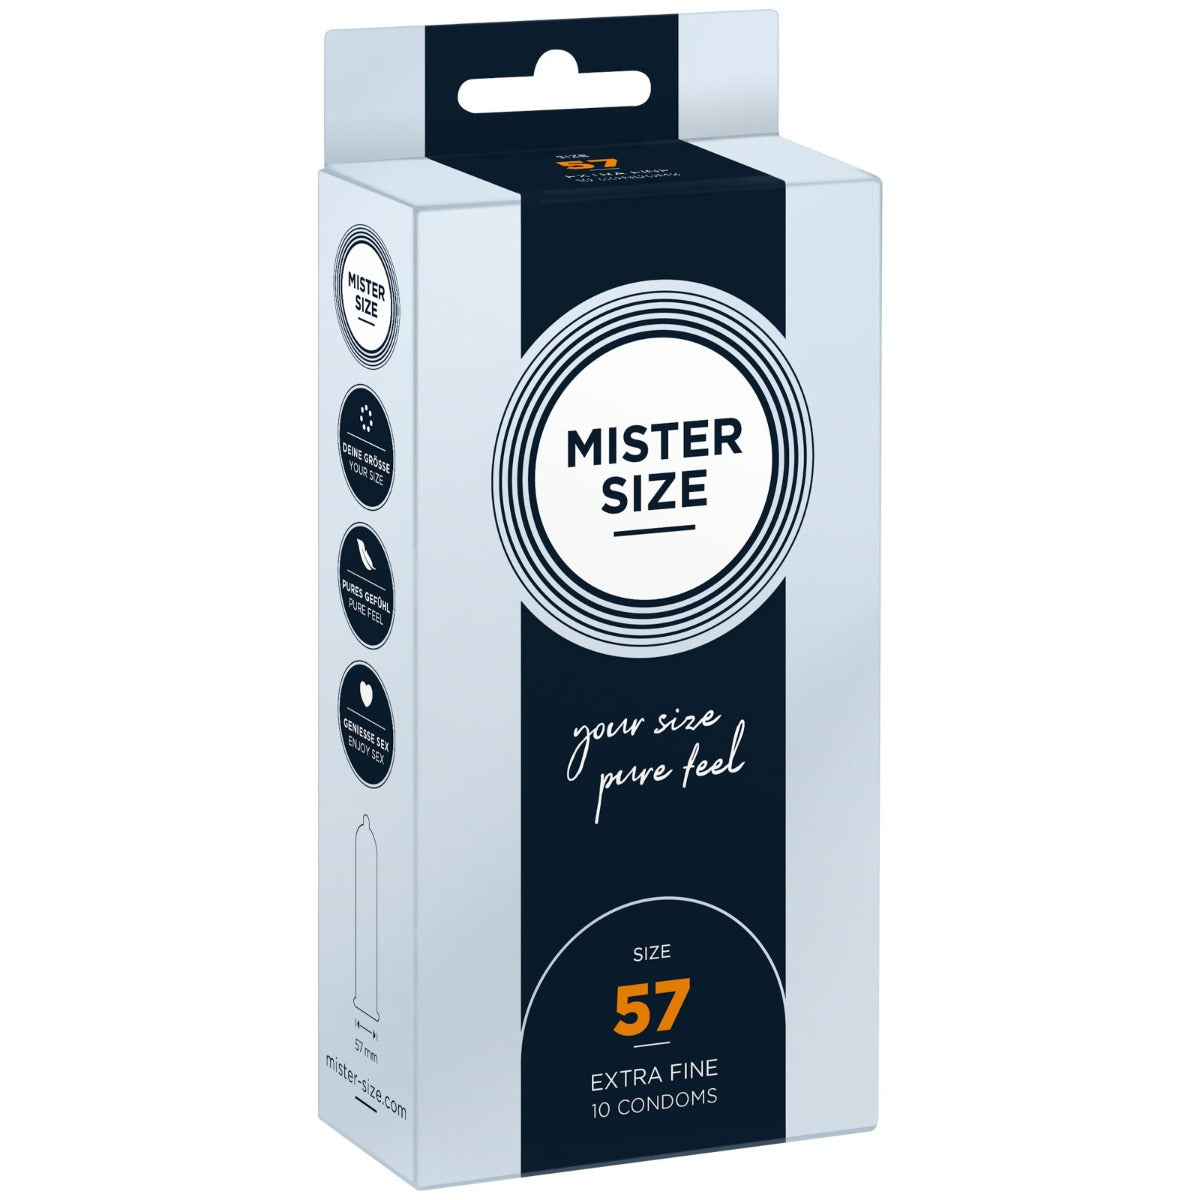 MISTER SIZE | Pure feel Condoms - Size 57 mm (10 pack)